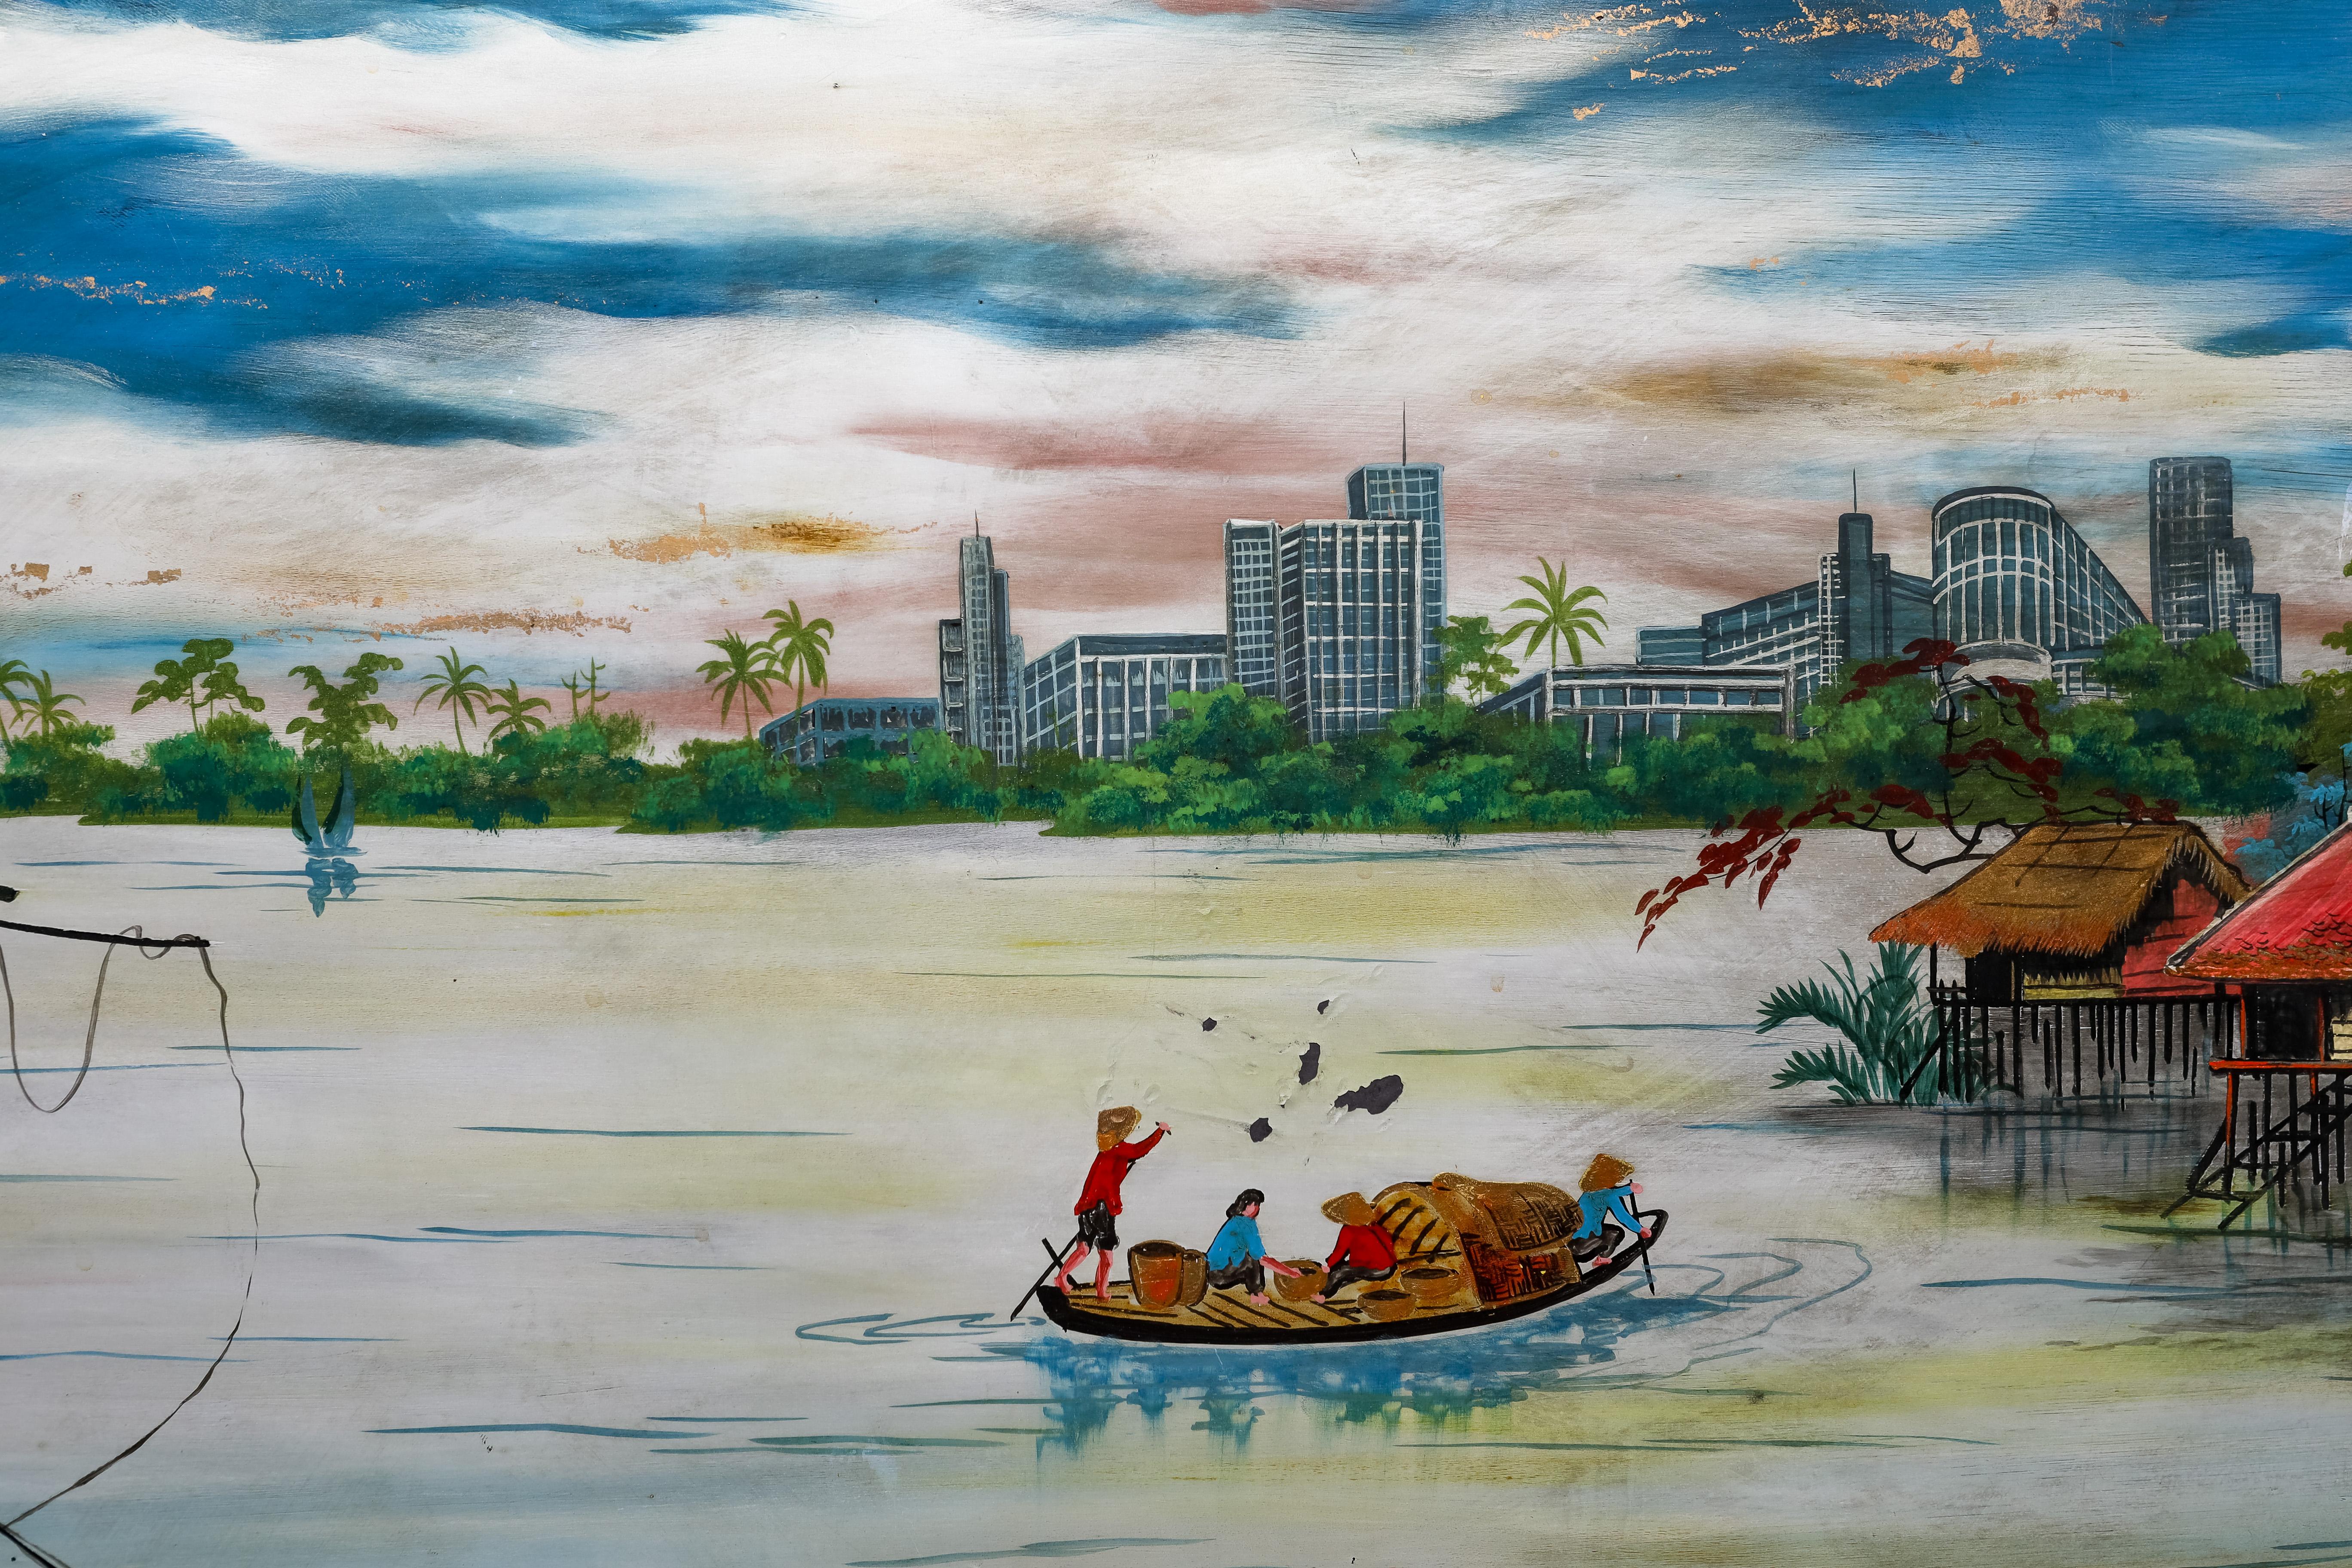 This lacquer depicts Vietnamese boats on a river with typical houses on stilts. On the back side there is a view of skyscrapers. This lacquer shows the contrast of two worlds. 